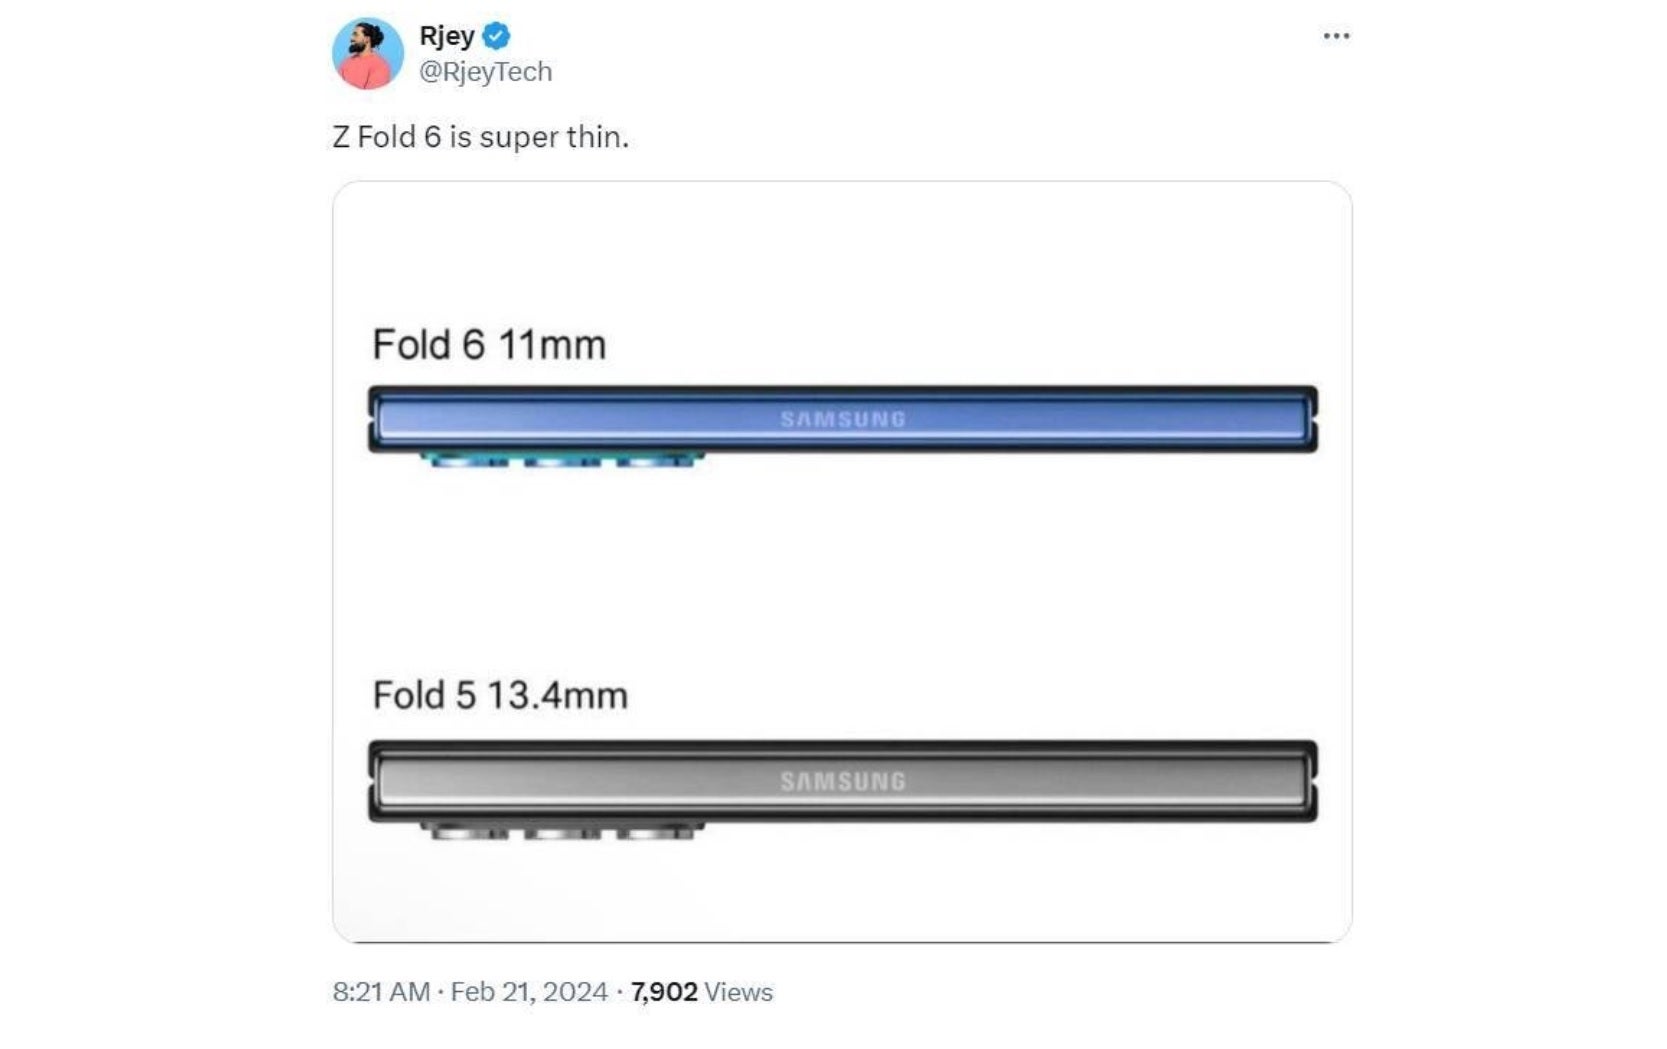 The Z Fold 6 is expected to shed some pounds off what we&#039;re familiar with - &quot;I&#039;ve wanted this since the start!&quot; - Z Fold 5 user reacts to Galaxy Z Fold 6 leaks